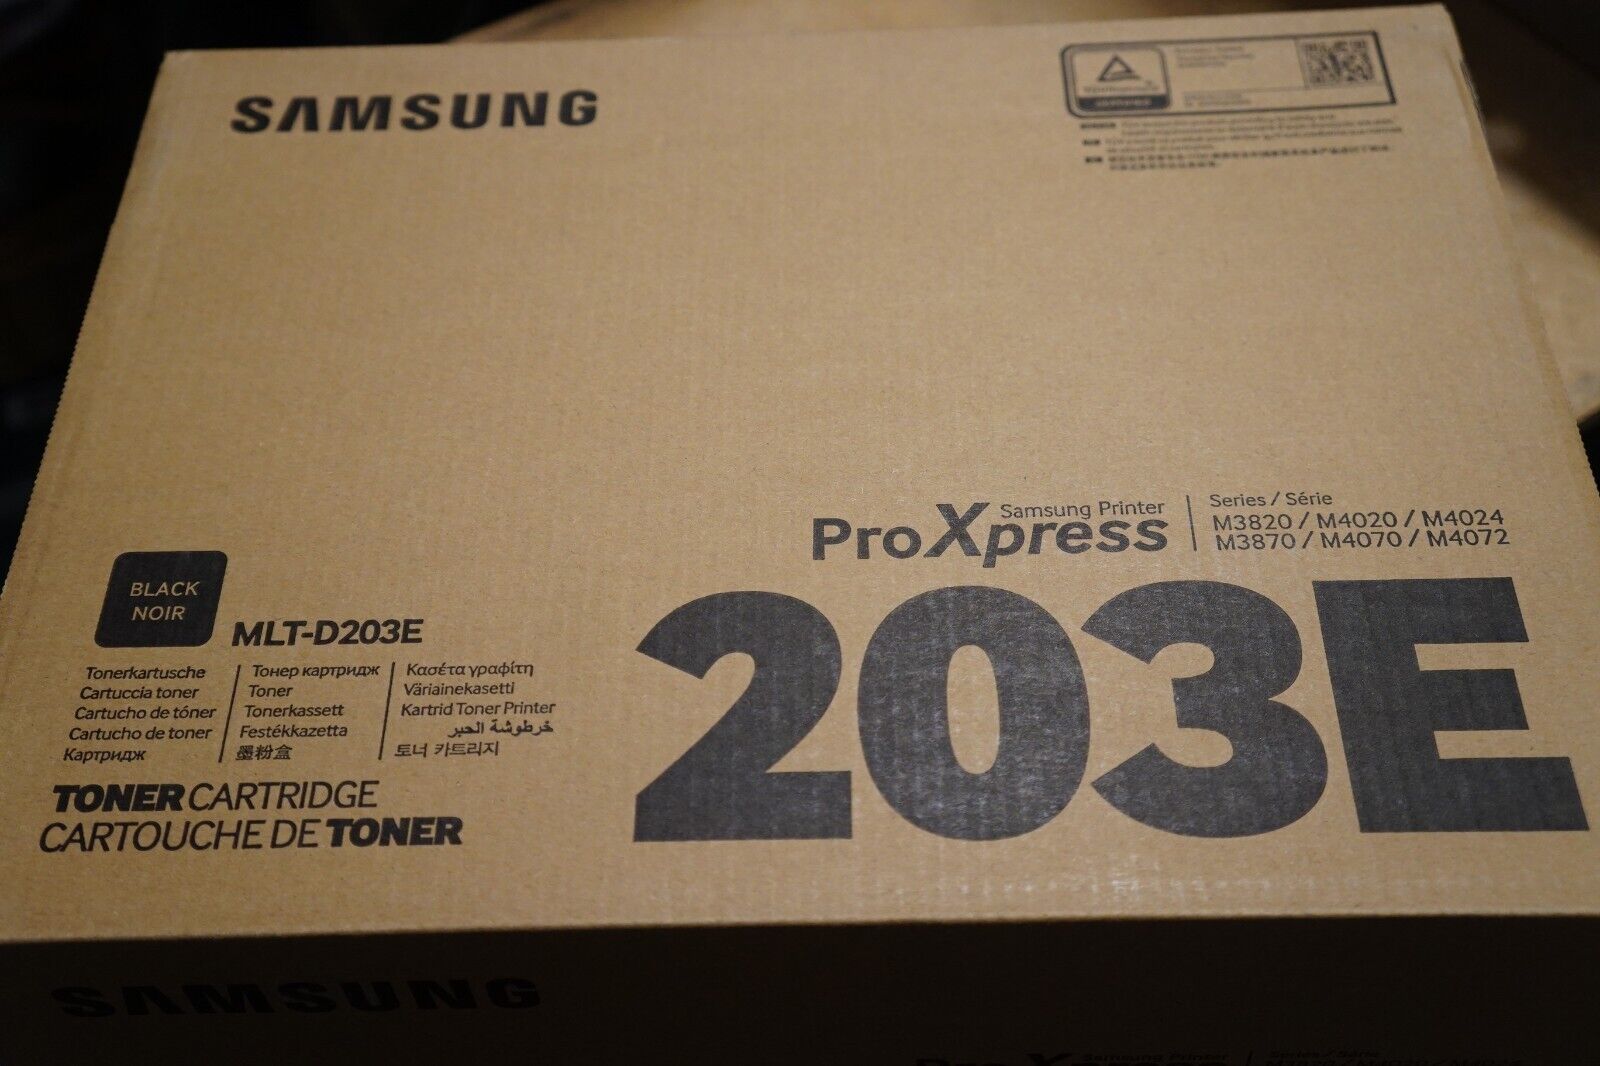 NEW Genuine Samsung MLT-D203E Extra HighYield Black Toner Cartridge 10,000 Pages